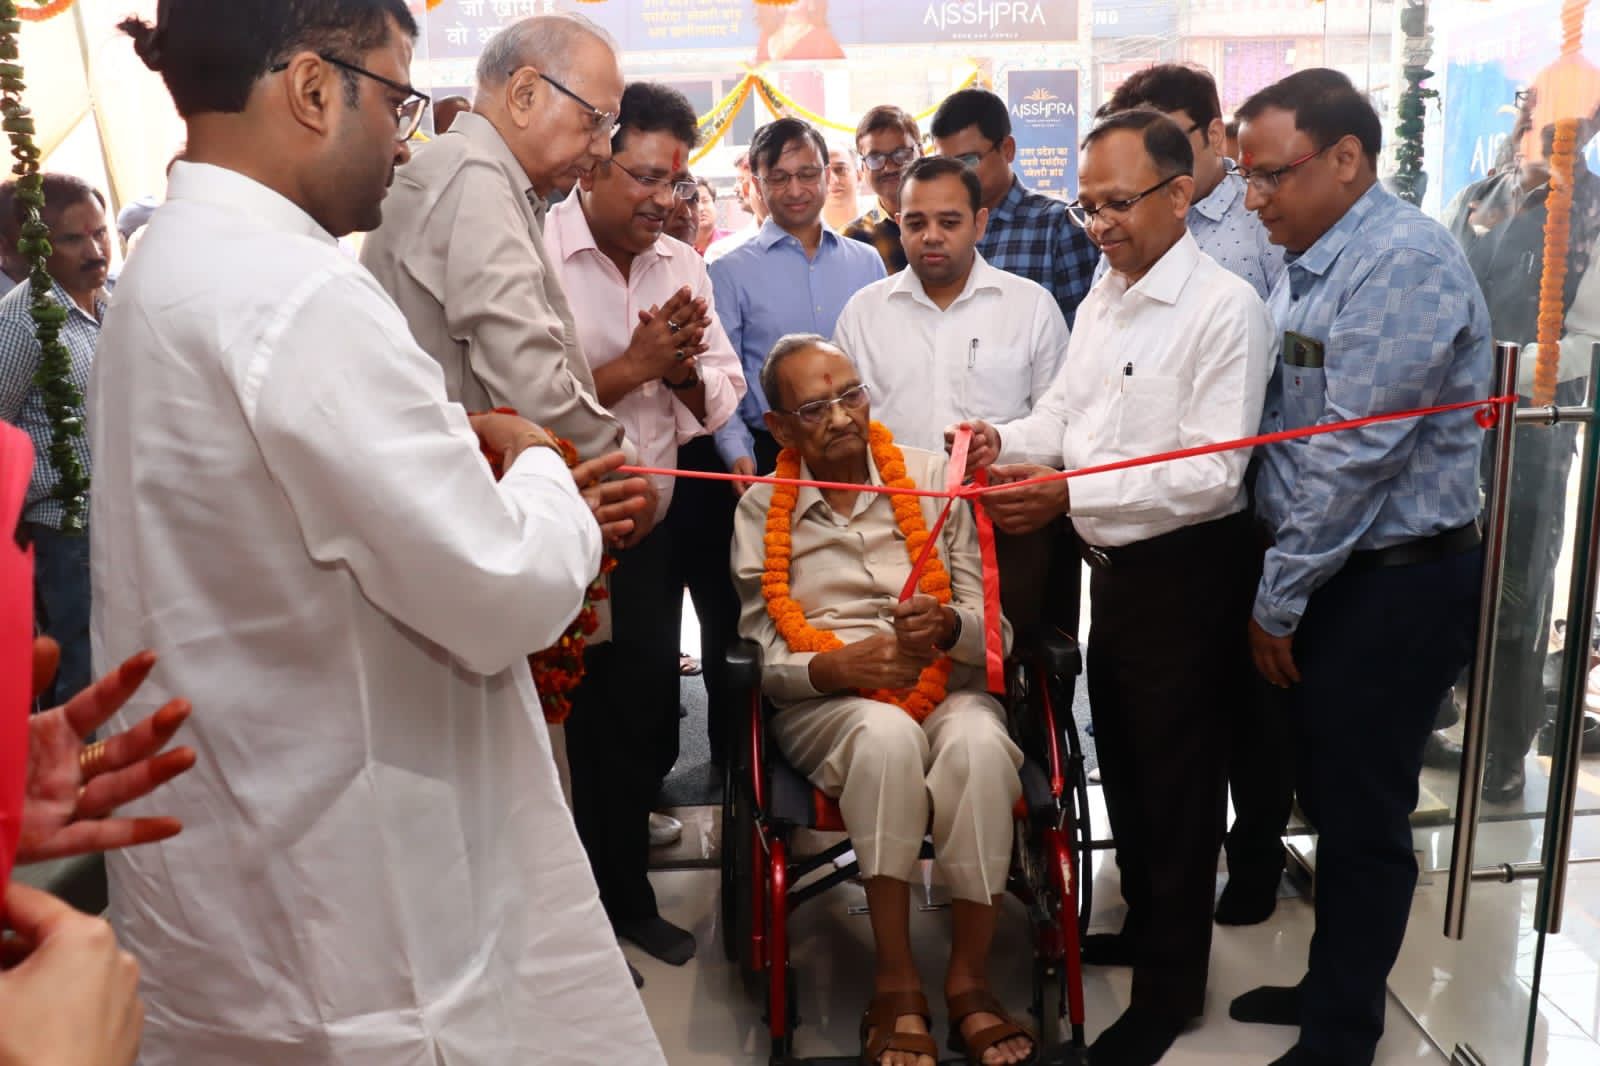 Aisshpra Gems and Jewels inaugurates its new store in Khalilabad. 